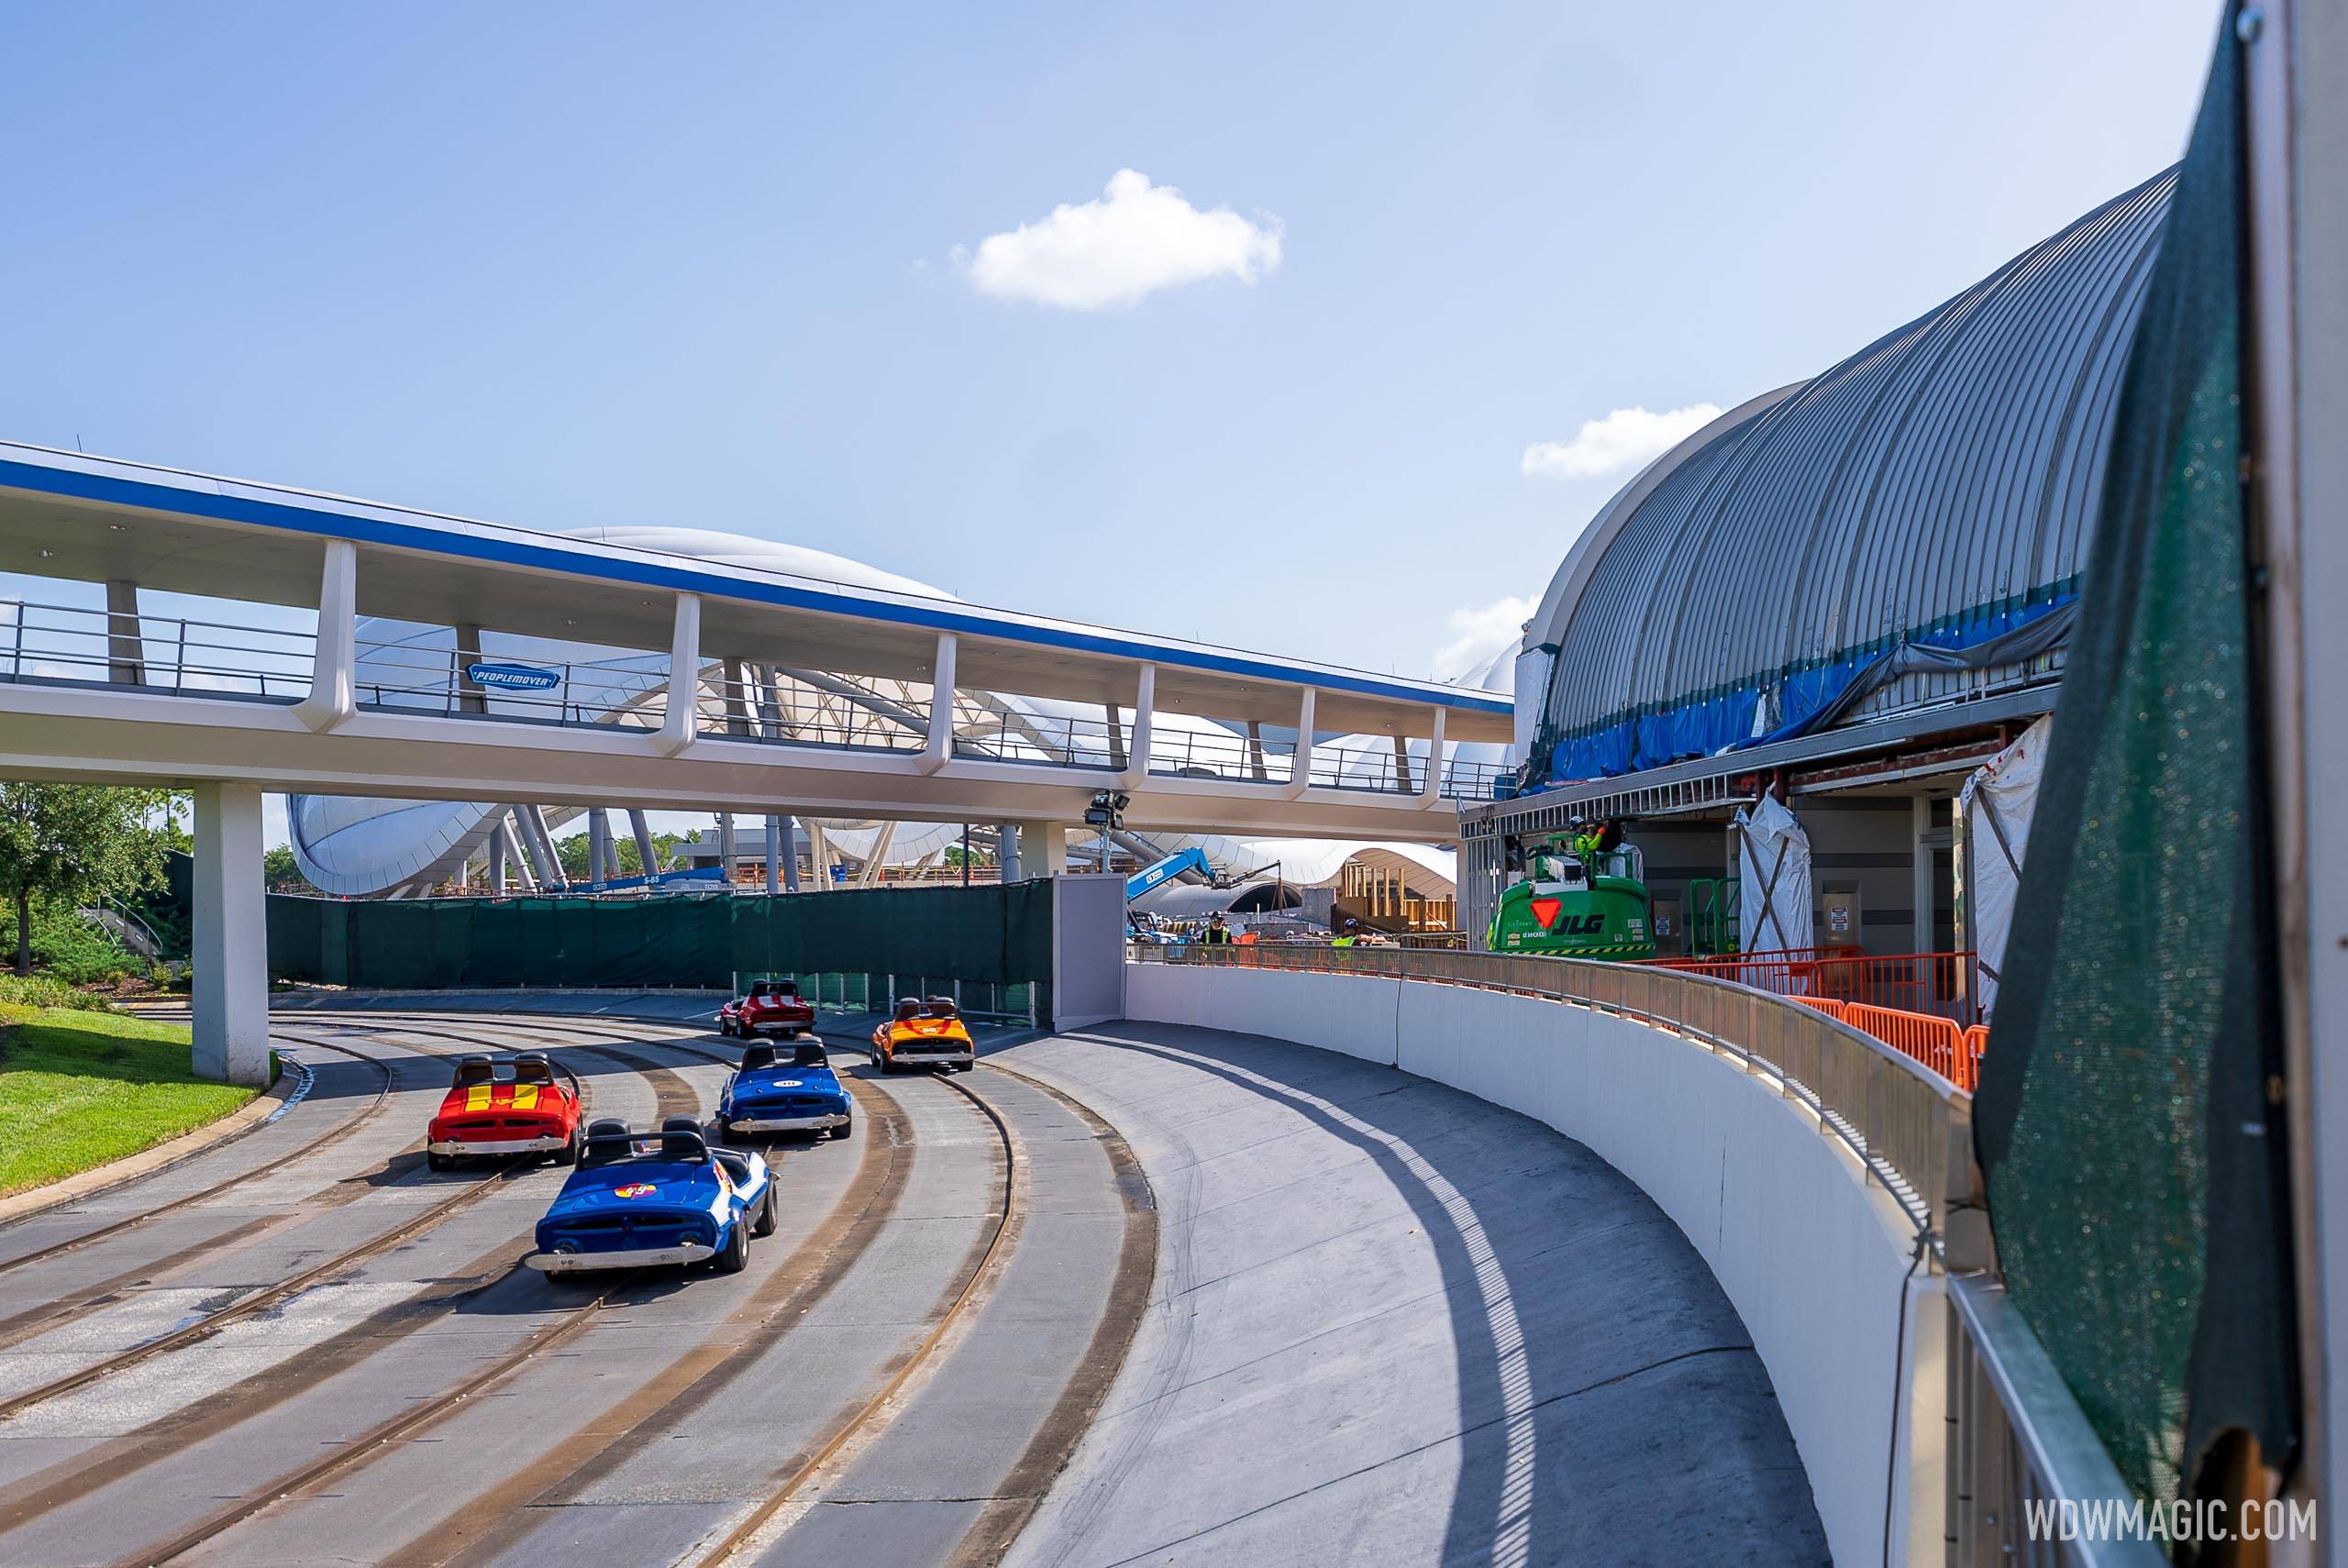 Tomorrowland Light and Power Co exterior changes - July 20 2022